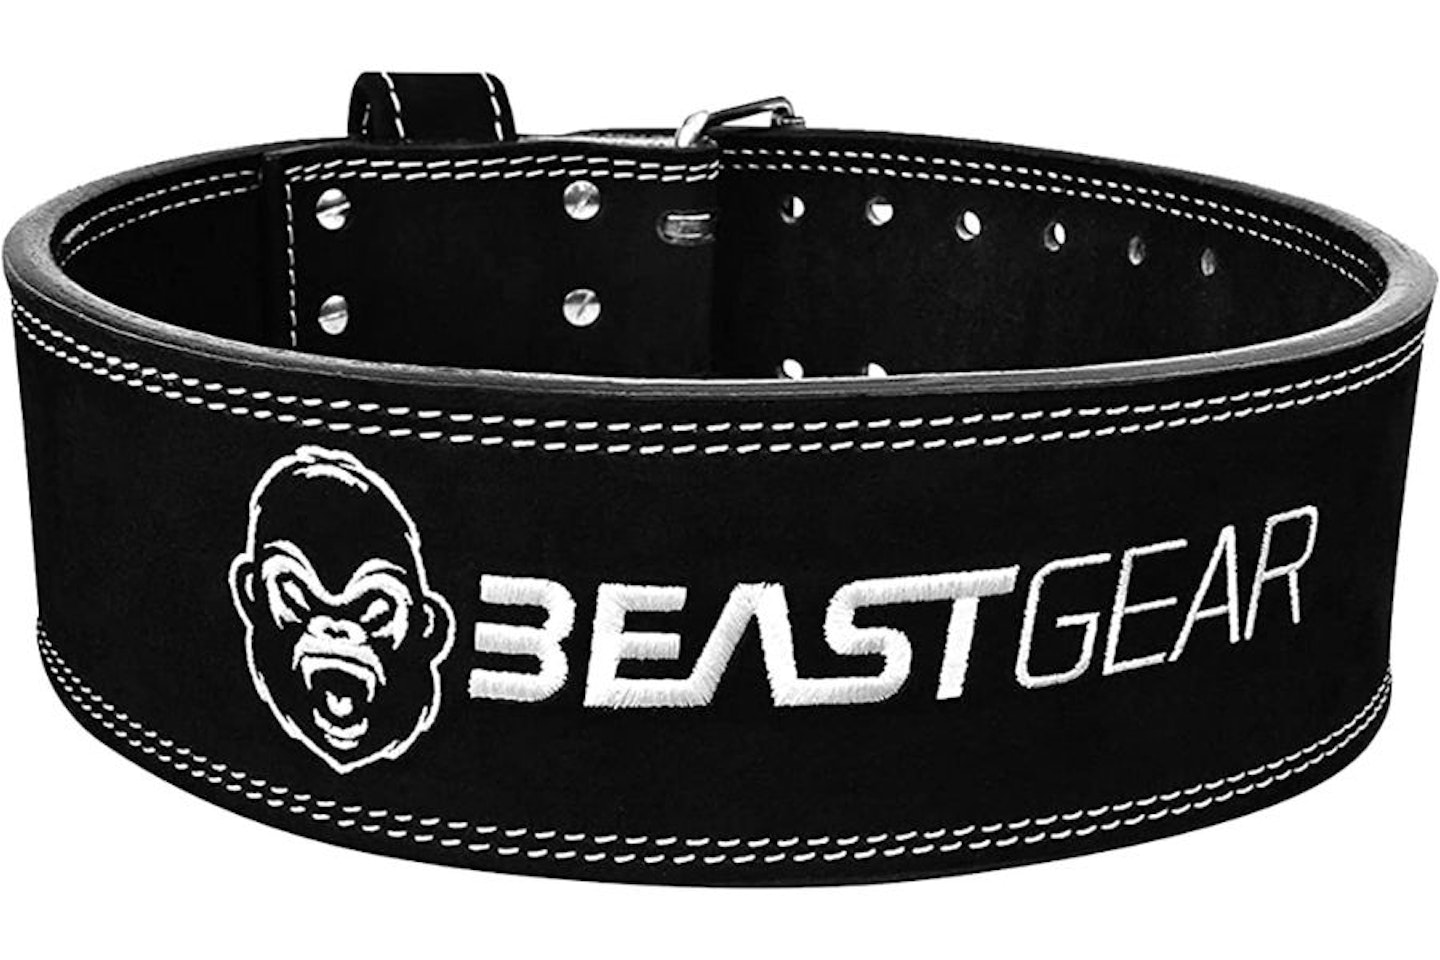 The best leather weightlifting belts